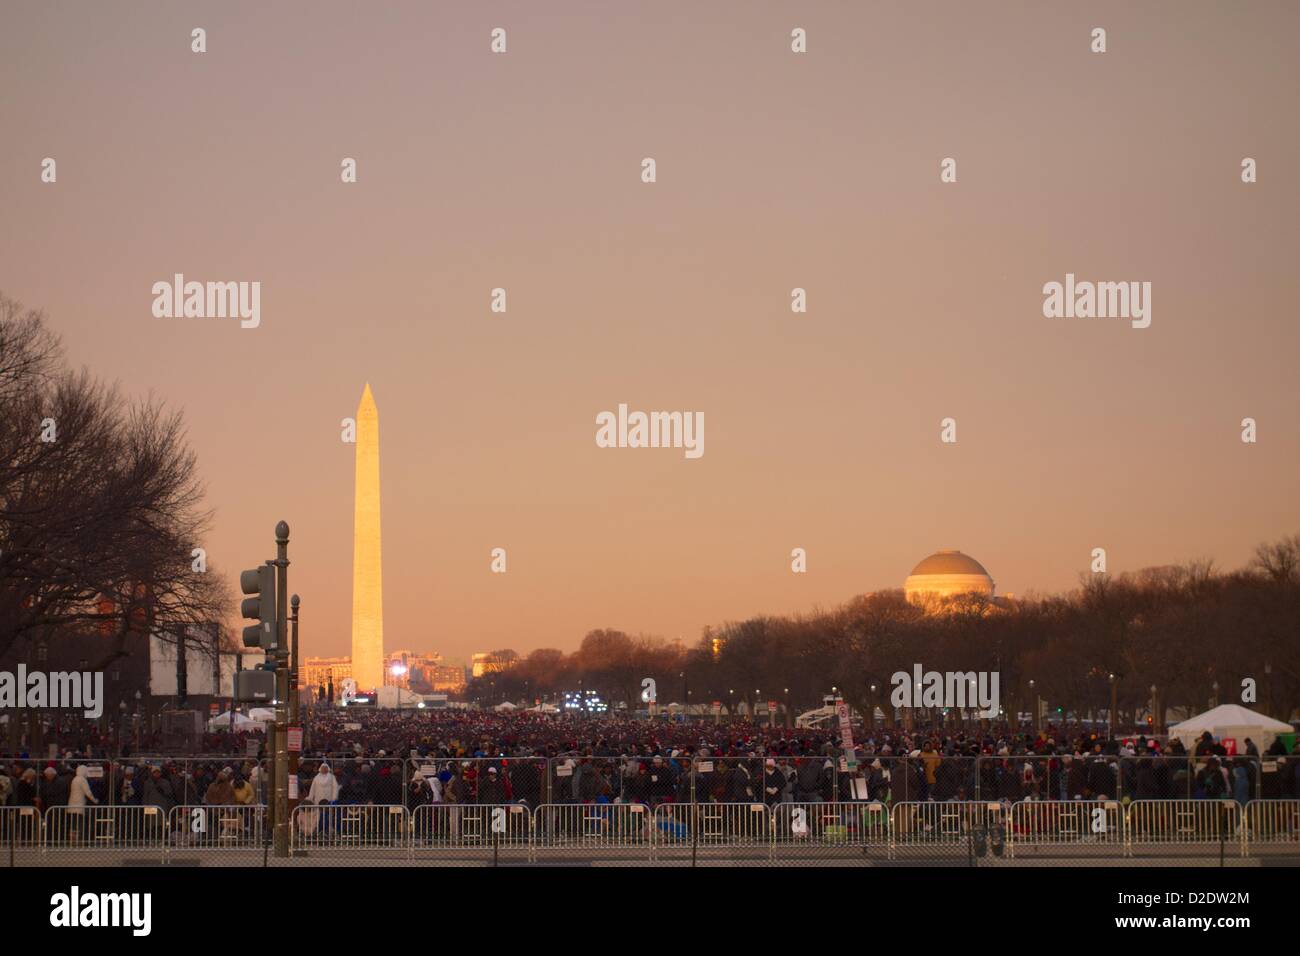 Washington DC. January 21, 2013,  A large crowd gathers on the National Mall for the inaugural ceremony. President Barack Obama, officially sworn in to a second term yesterday due to a constitutional requirement, takes a ceremonial oath of office today. Stock Photo